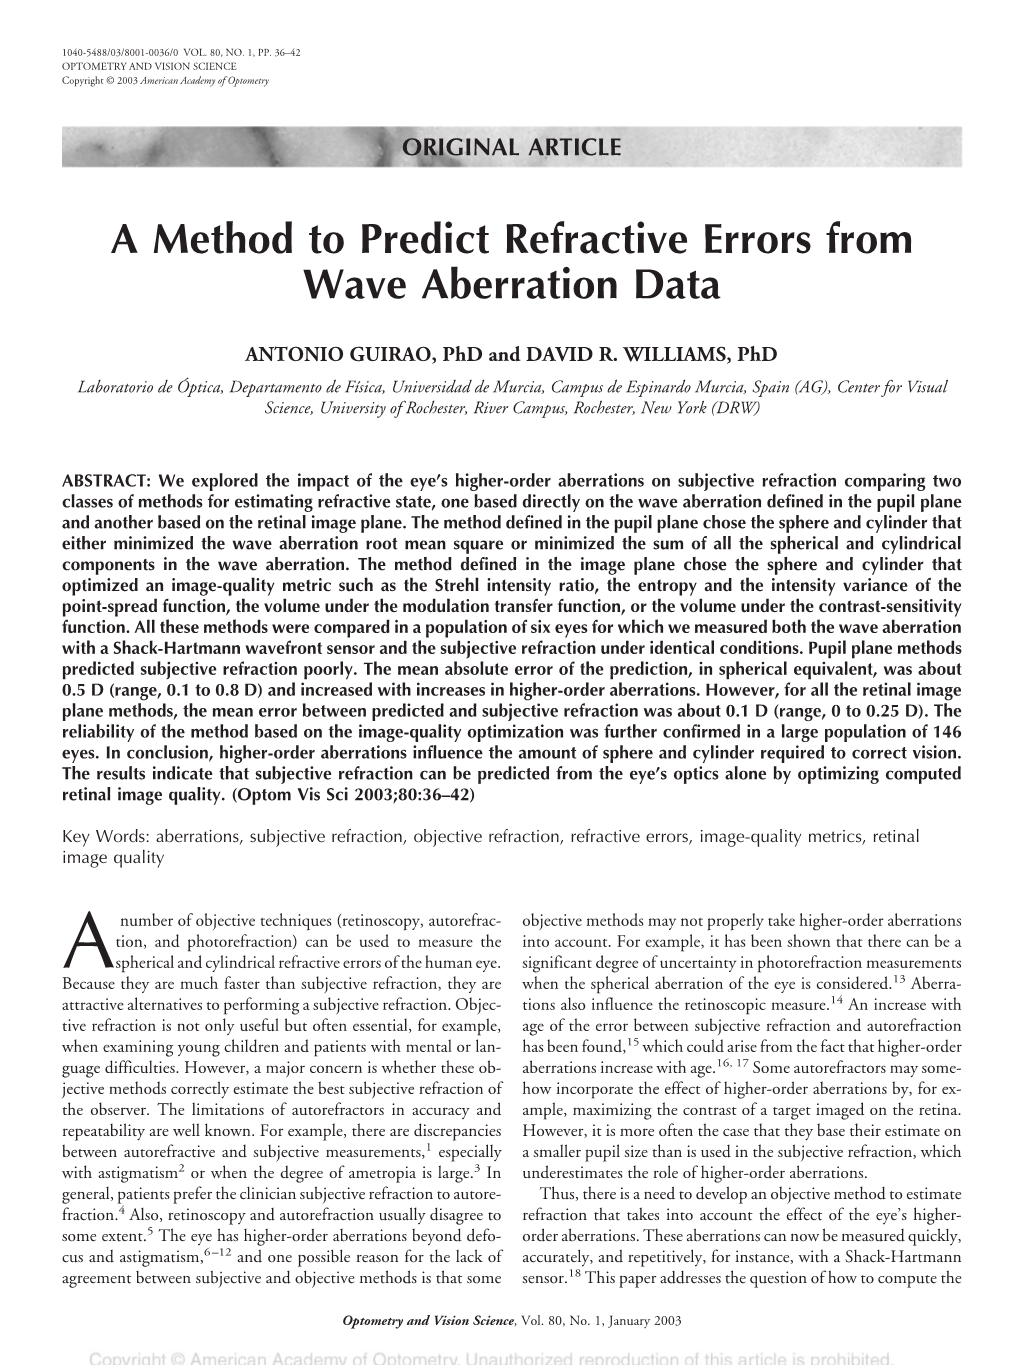 A Method to Predict Refractive Errors from Wave Aberration Data